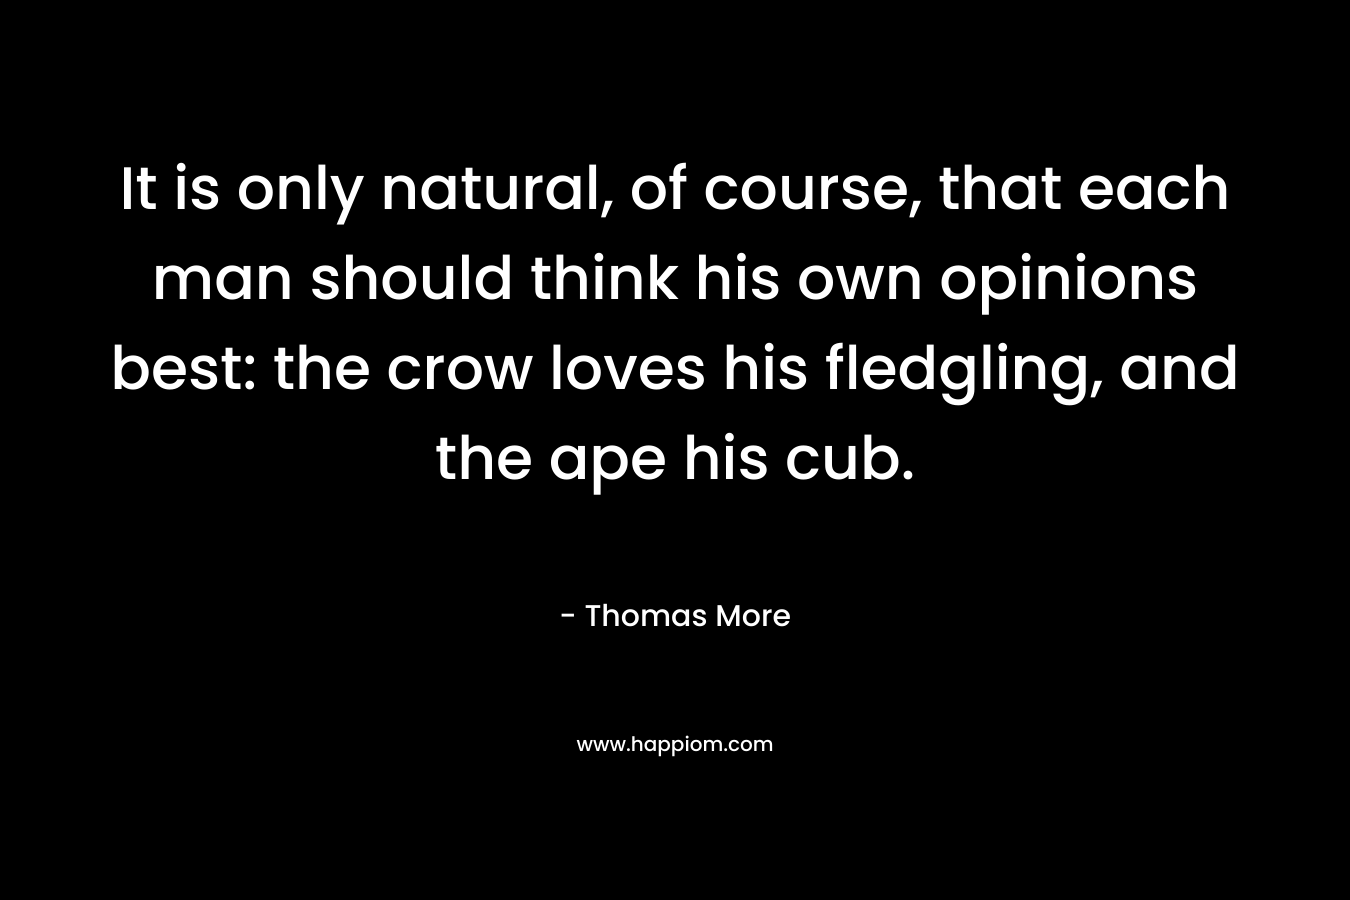 It is only natural, of course, that each man should think his own opinions best: the crow loves his fledgling, and the ape his cub. – Thomas More